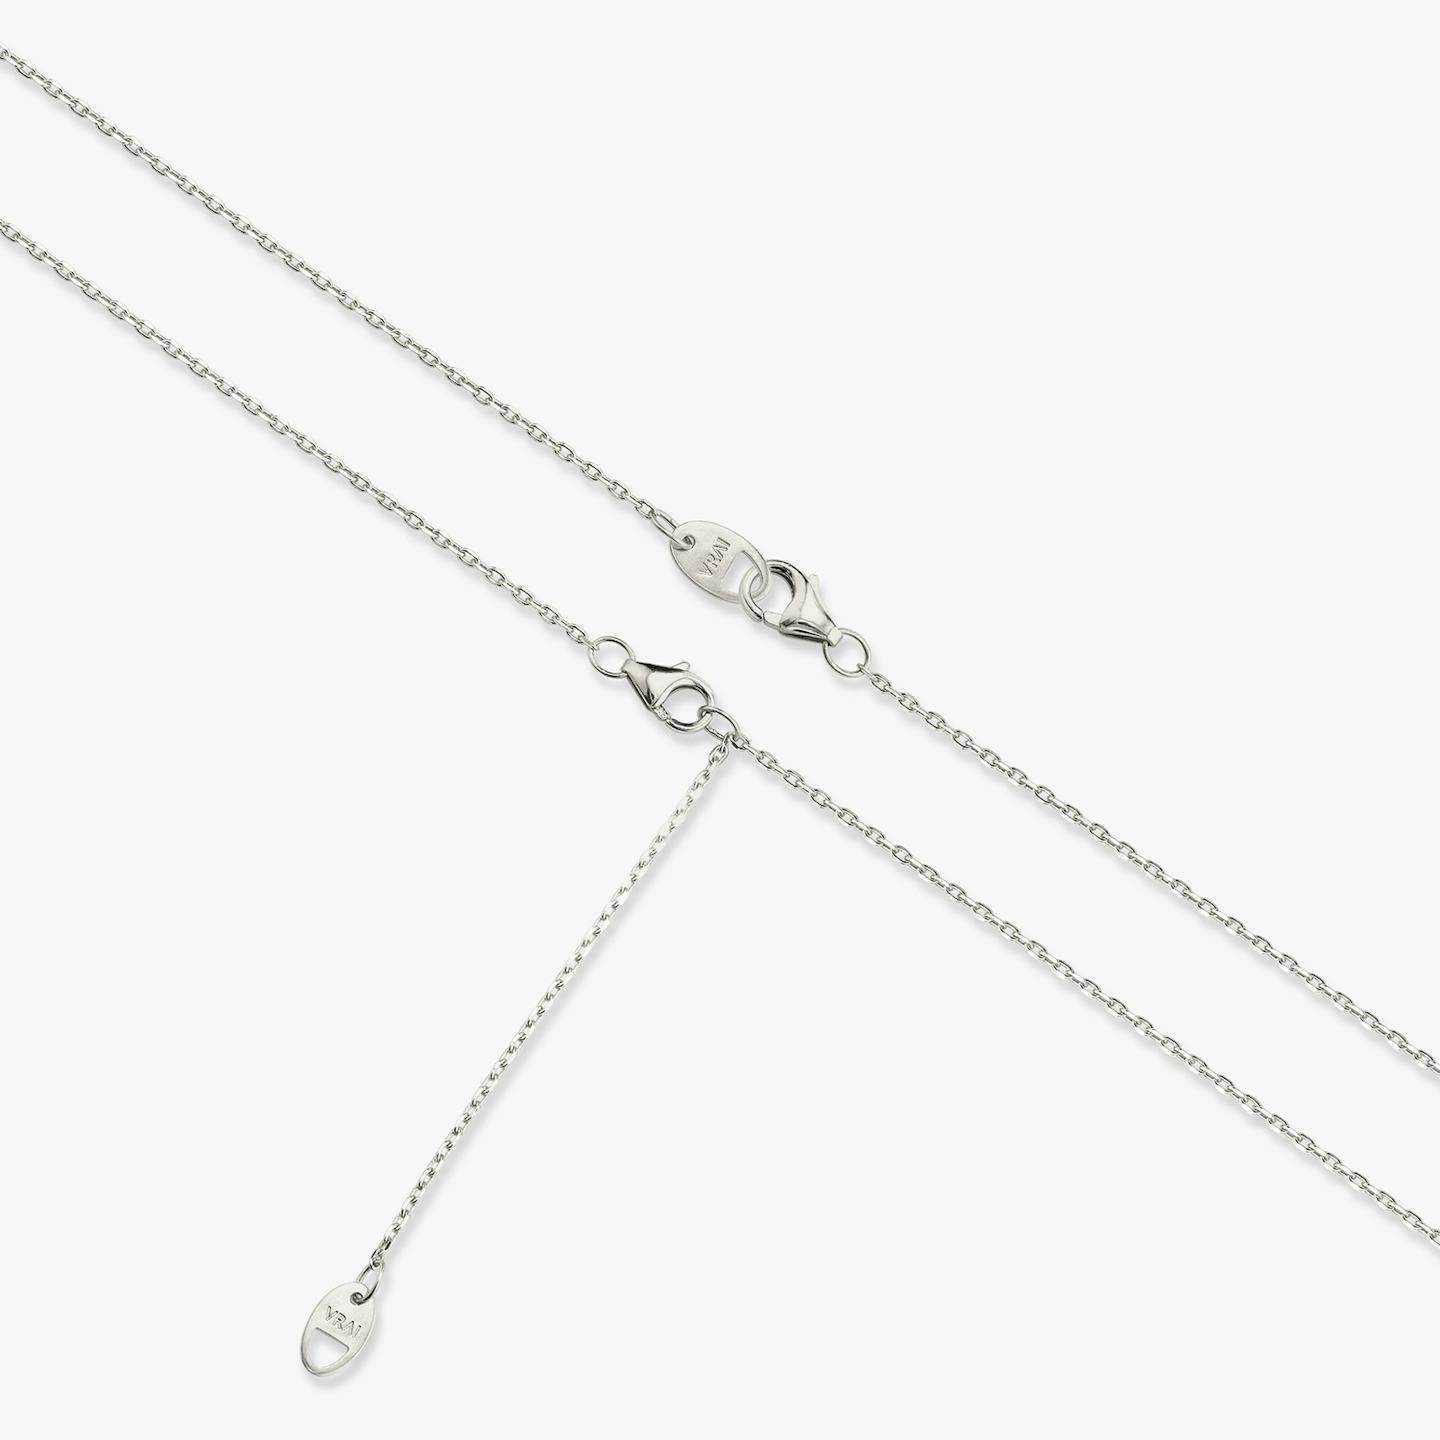 Blossom Necklace | Pavé Marquise | 14k | 18k White Gold | Chain length: 16-18